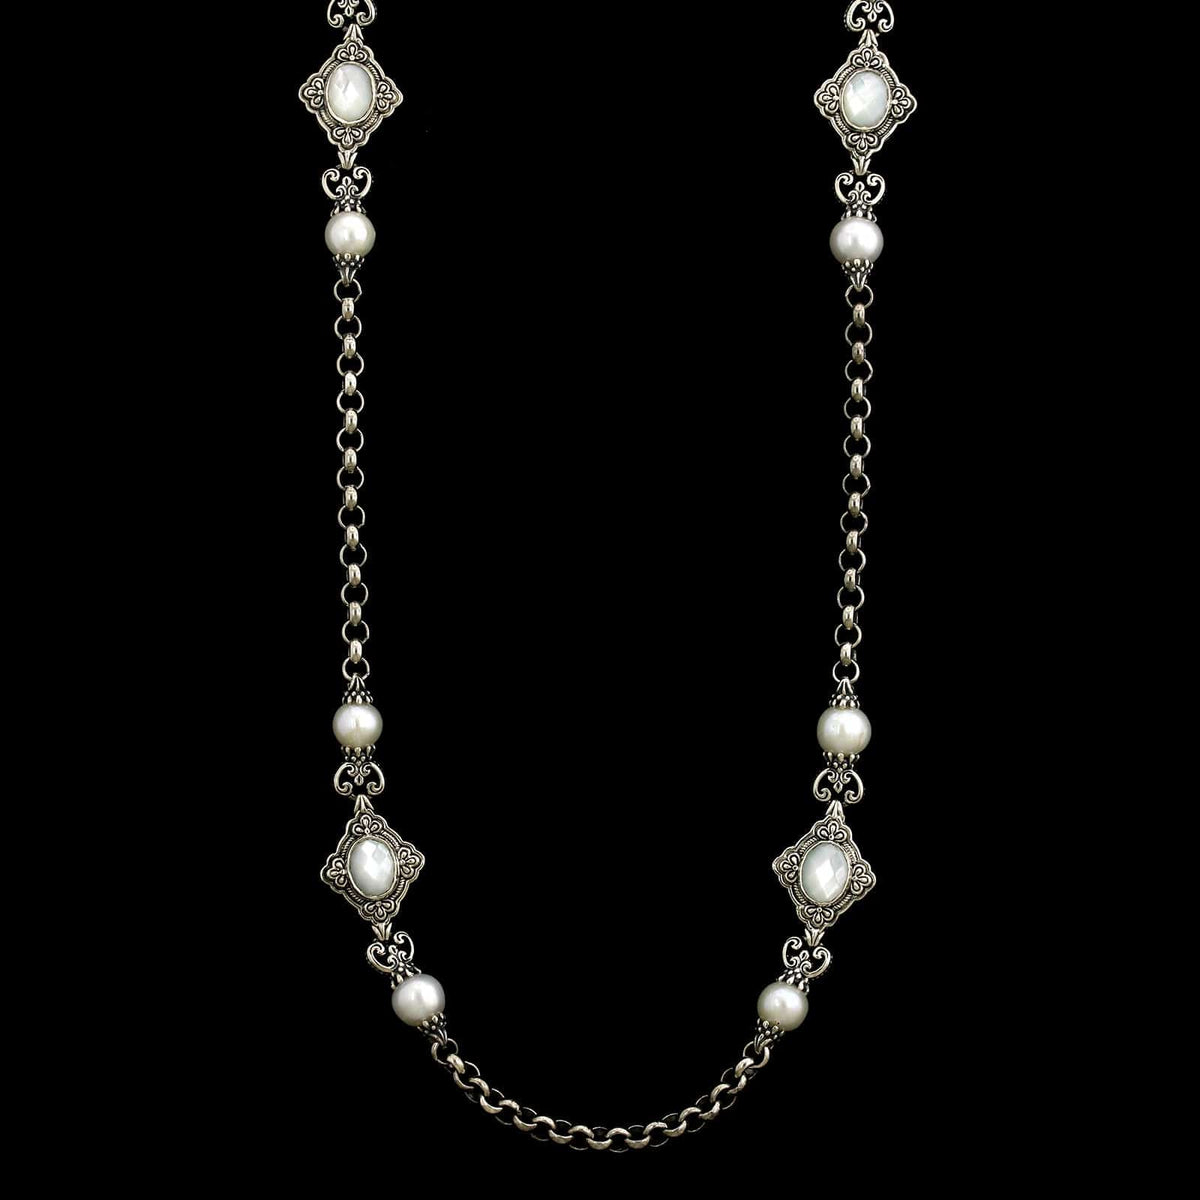 Konstantino Sterling Silver Estate Mother of Pearl and Cultured Freshwater Pearl Necklace